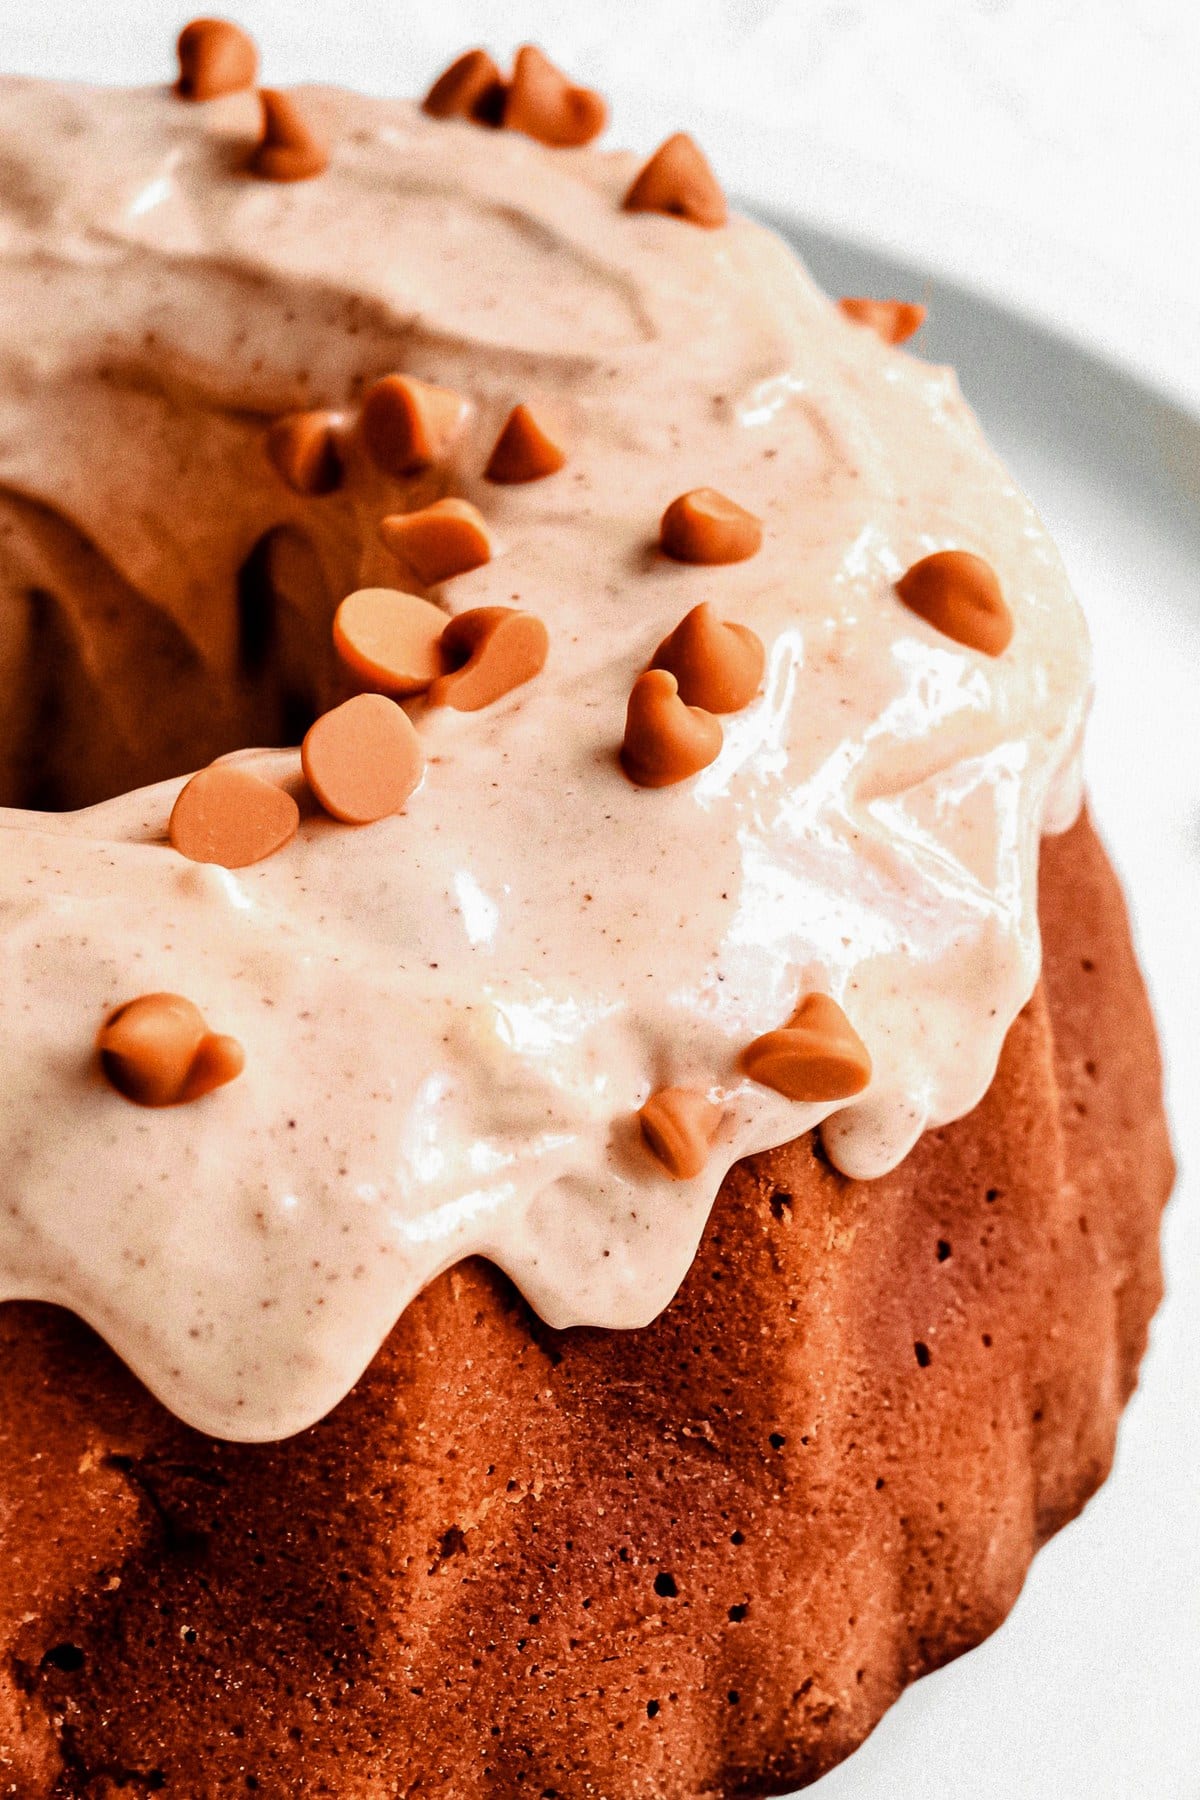 Close-up image of the cinnamon icing and cinnamon chips on top of the featured cake.